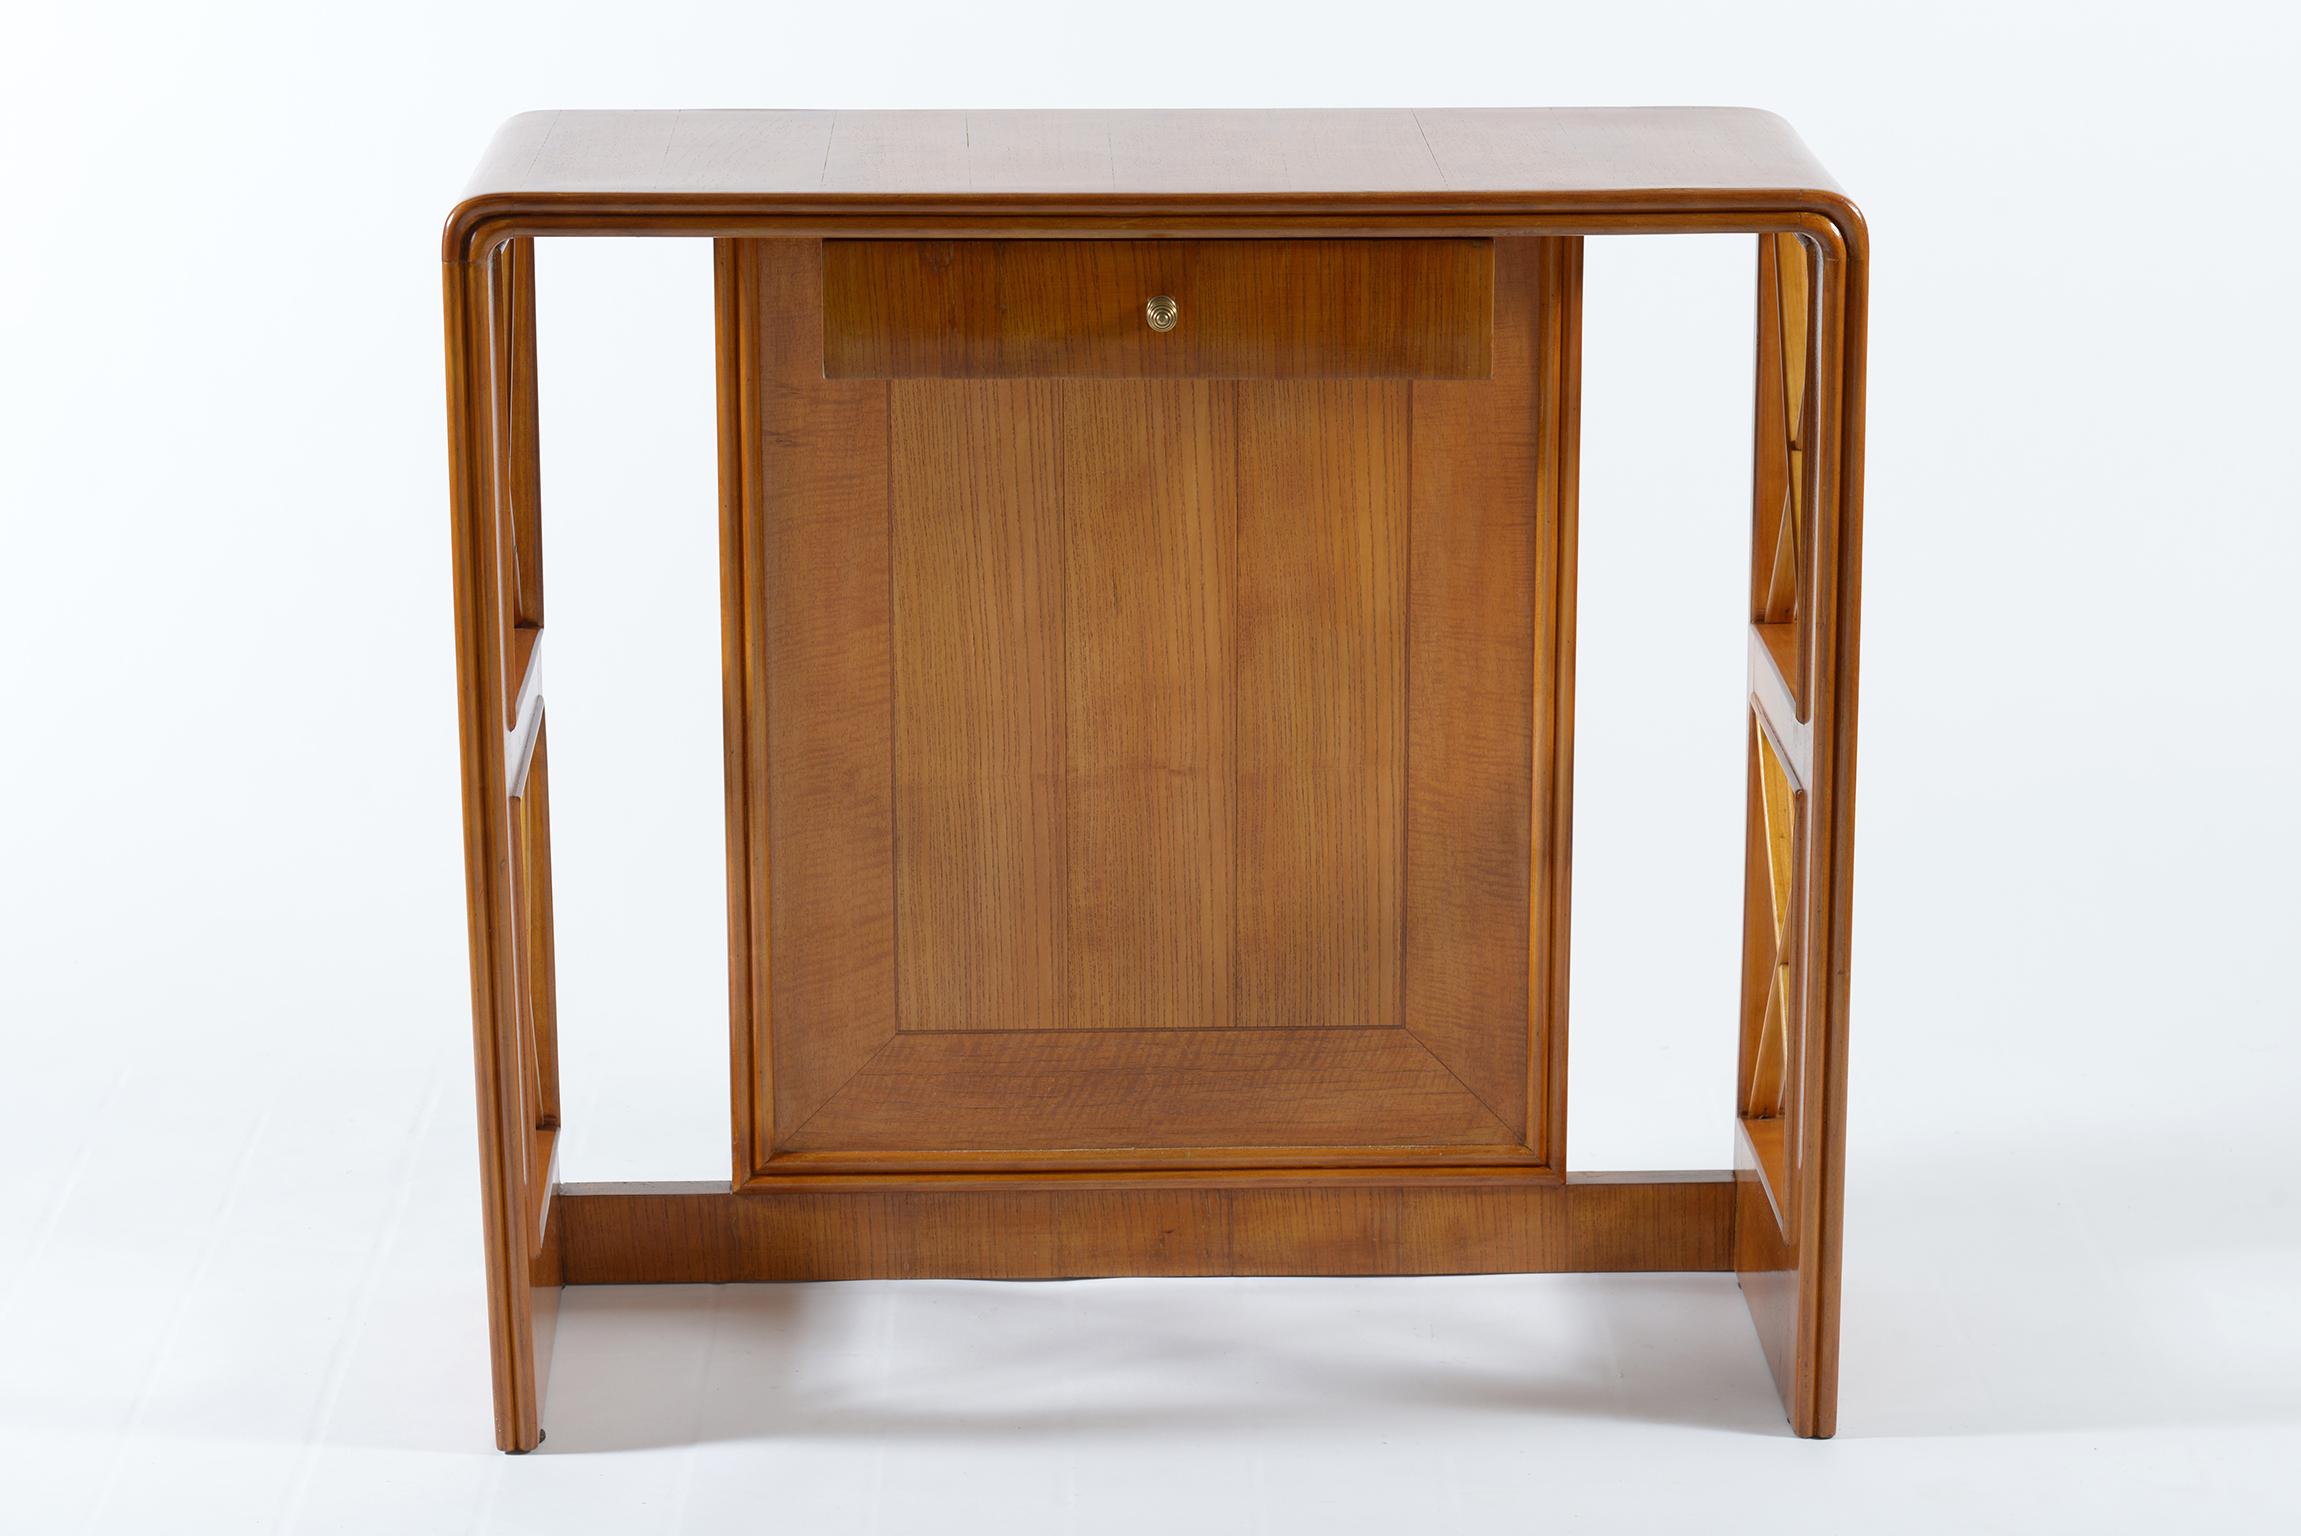 Midcentury 1940s Italian precious warm blond walnut console with central detached drawer and handle in brass casting, sides with crossed wooden panels that from lateral support by curving becomes the top of the console.

   